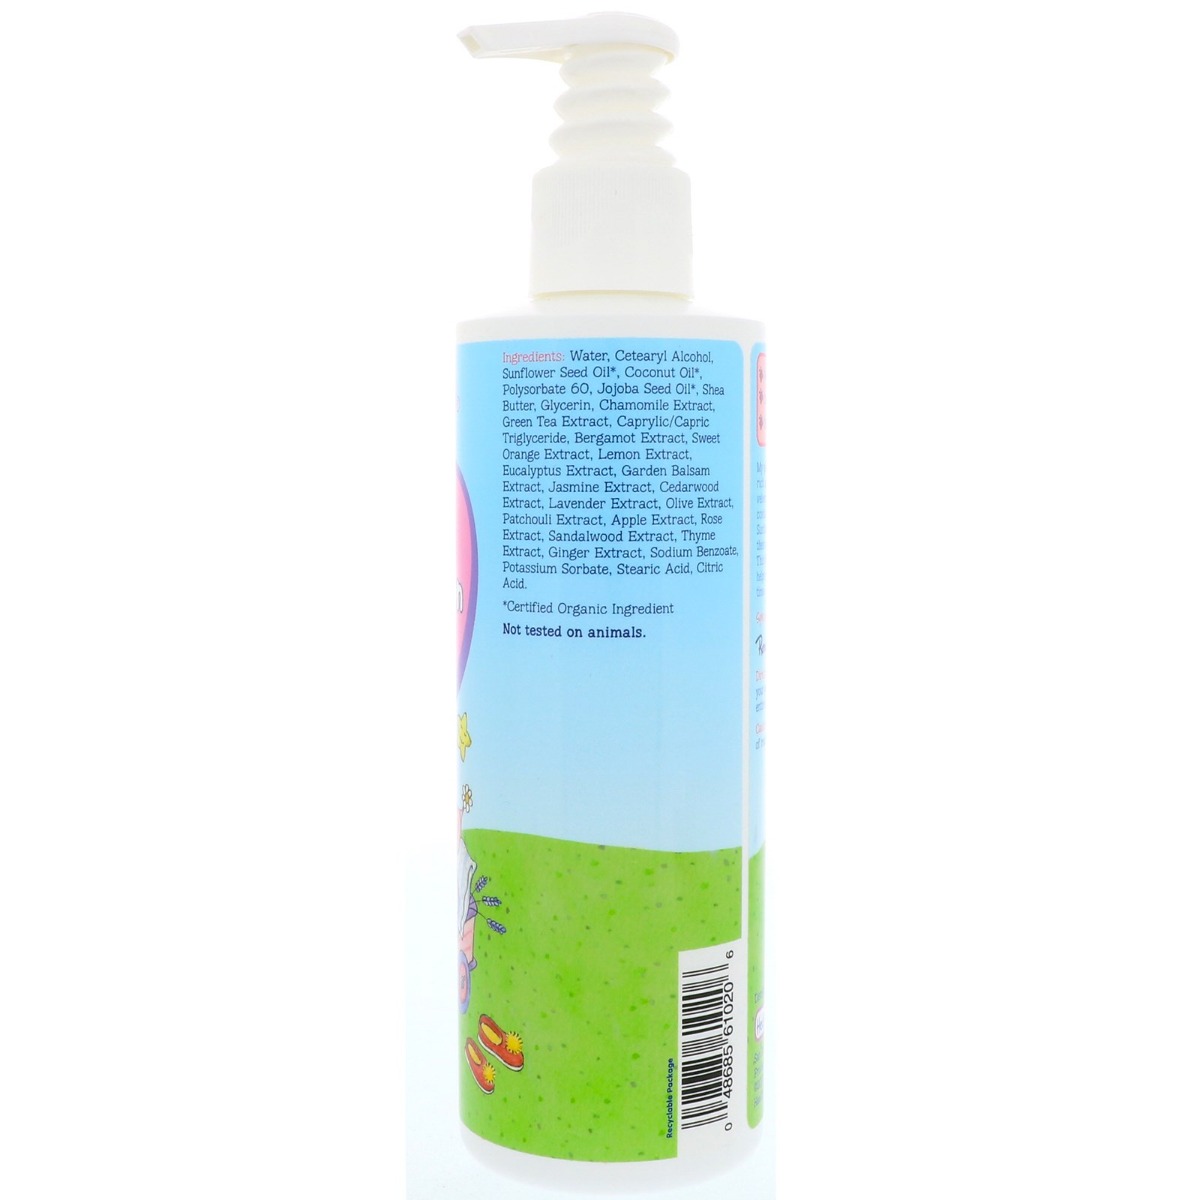 Khfm00331693 Soothing Baby Lotion, 8 Fl Oz